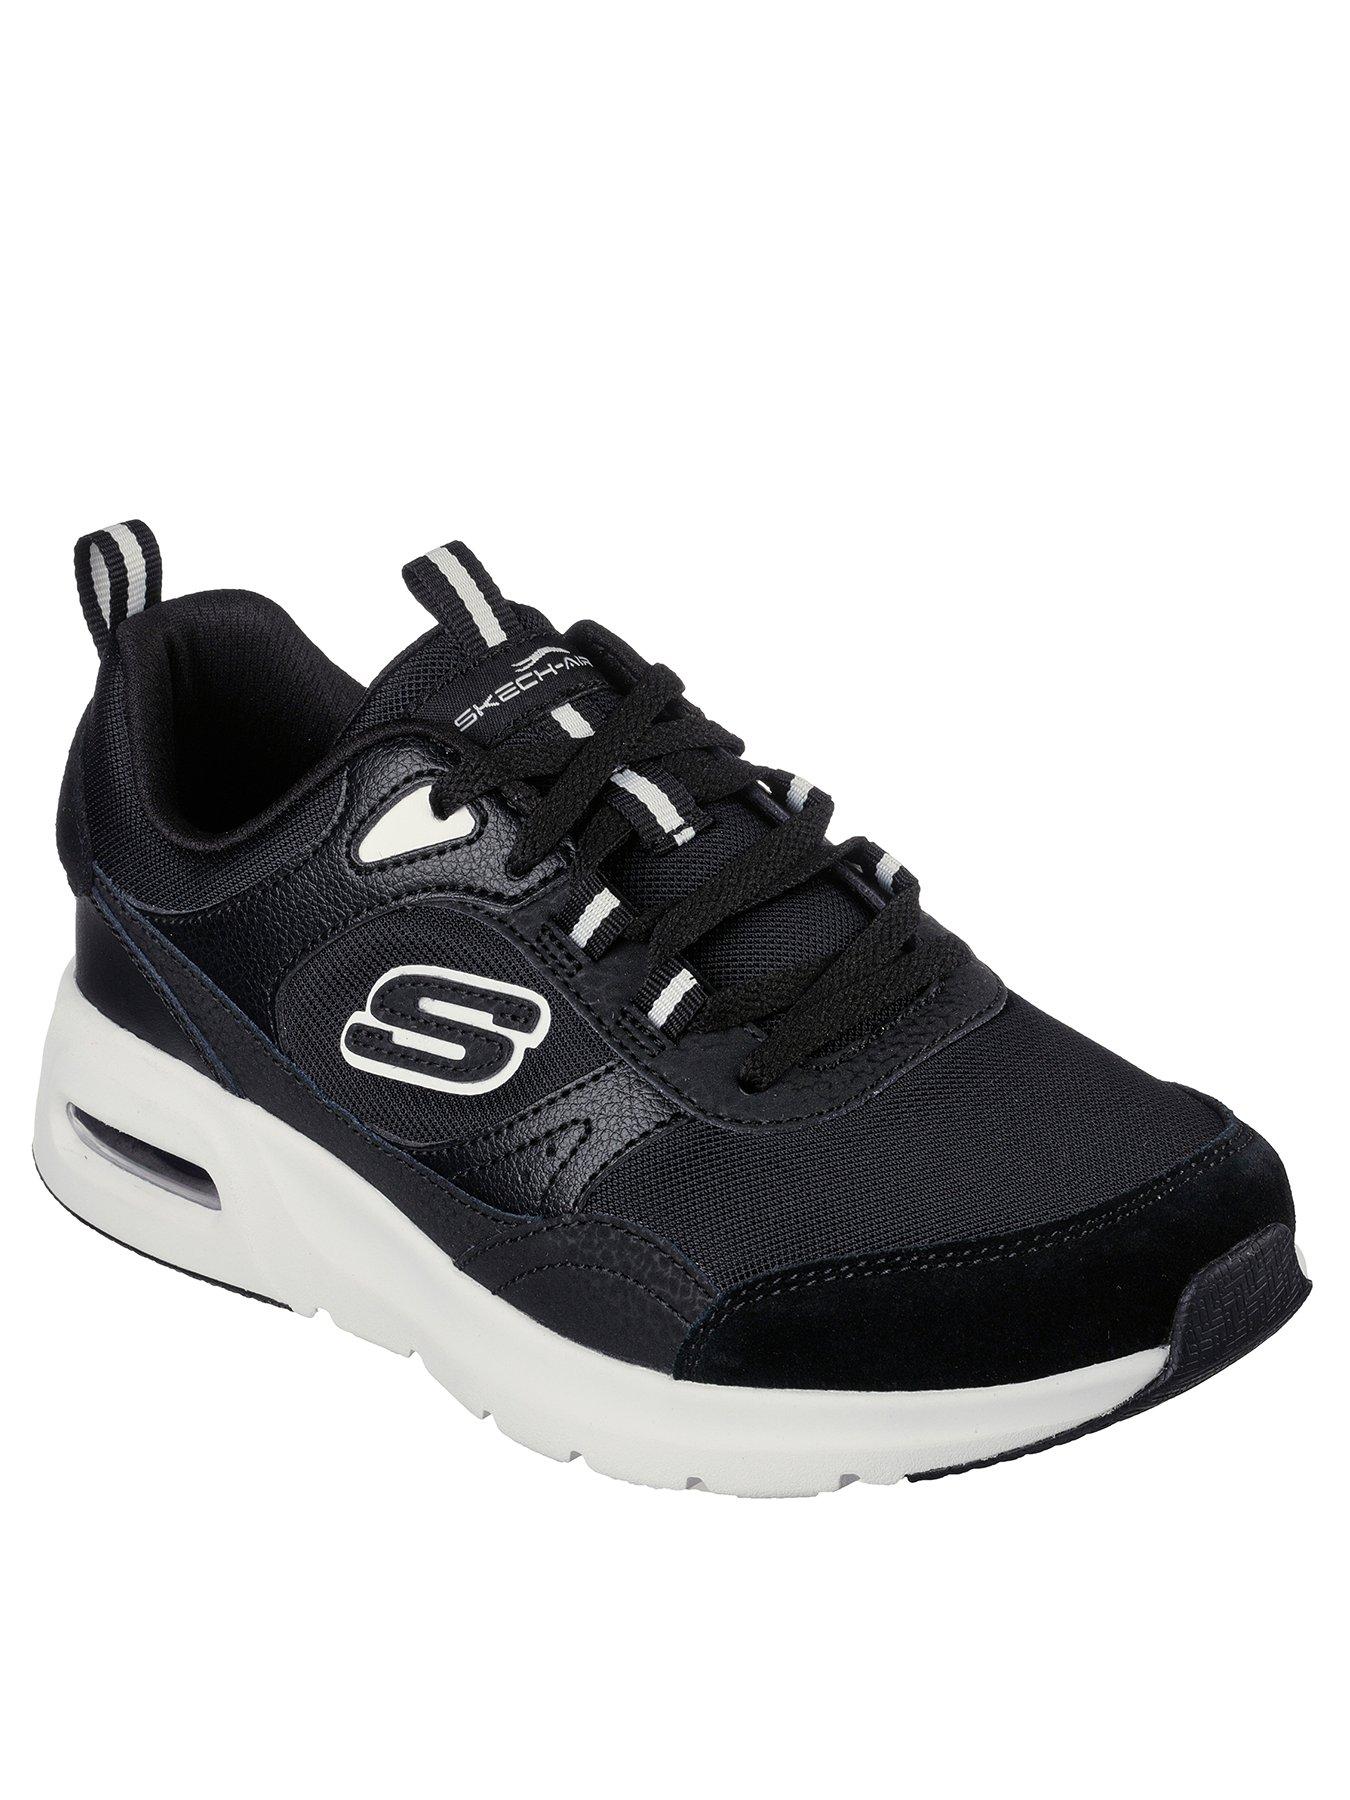 Skechers Skech-air Court Mesh Lace-up Black Leather/mesh/white | littlewoods.com